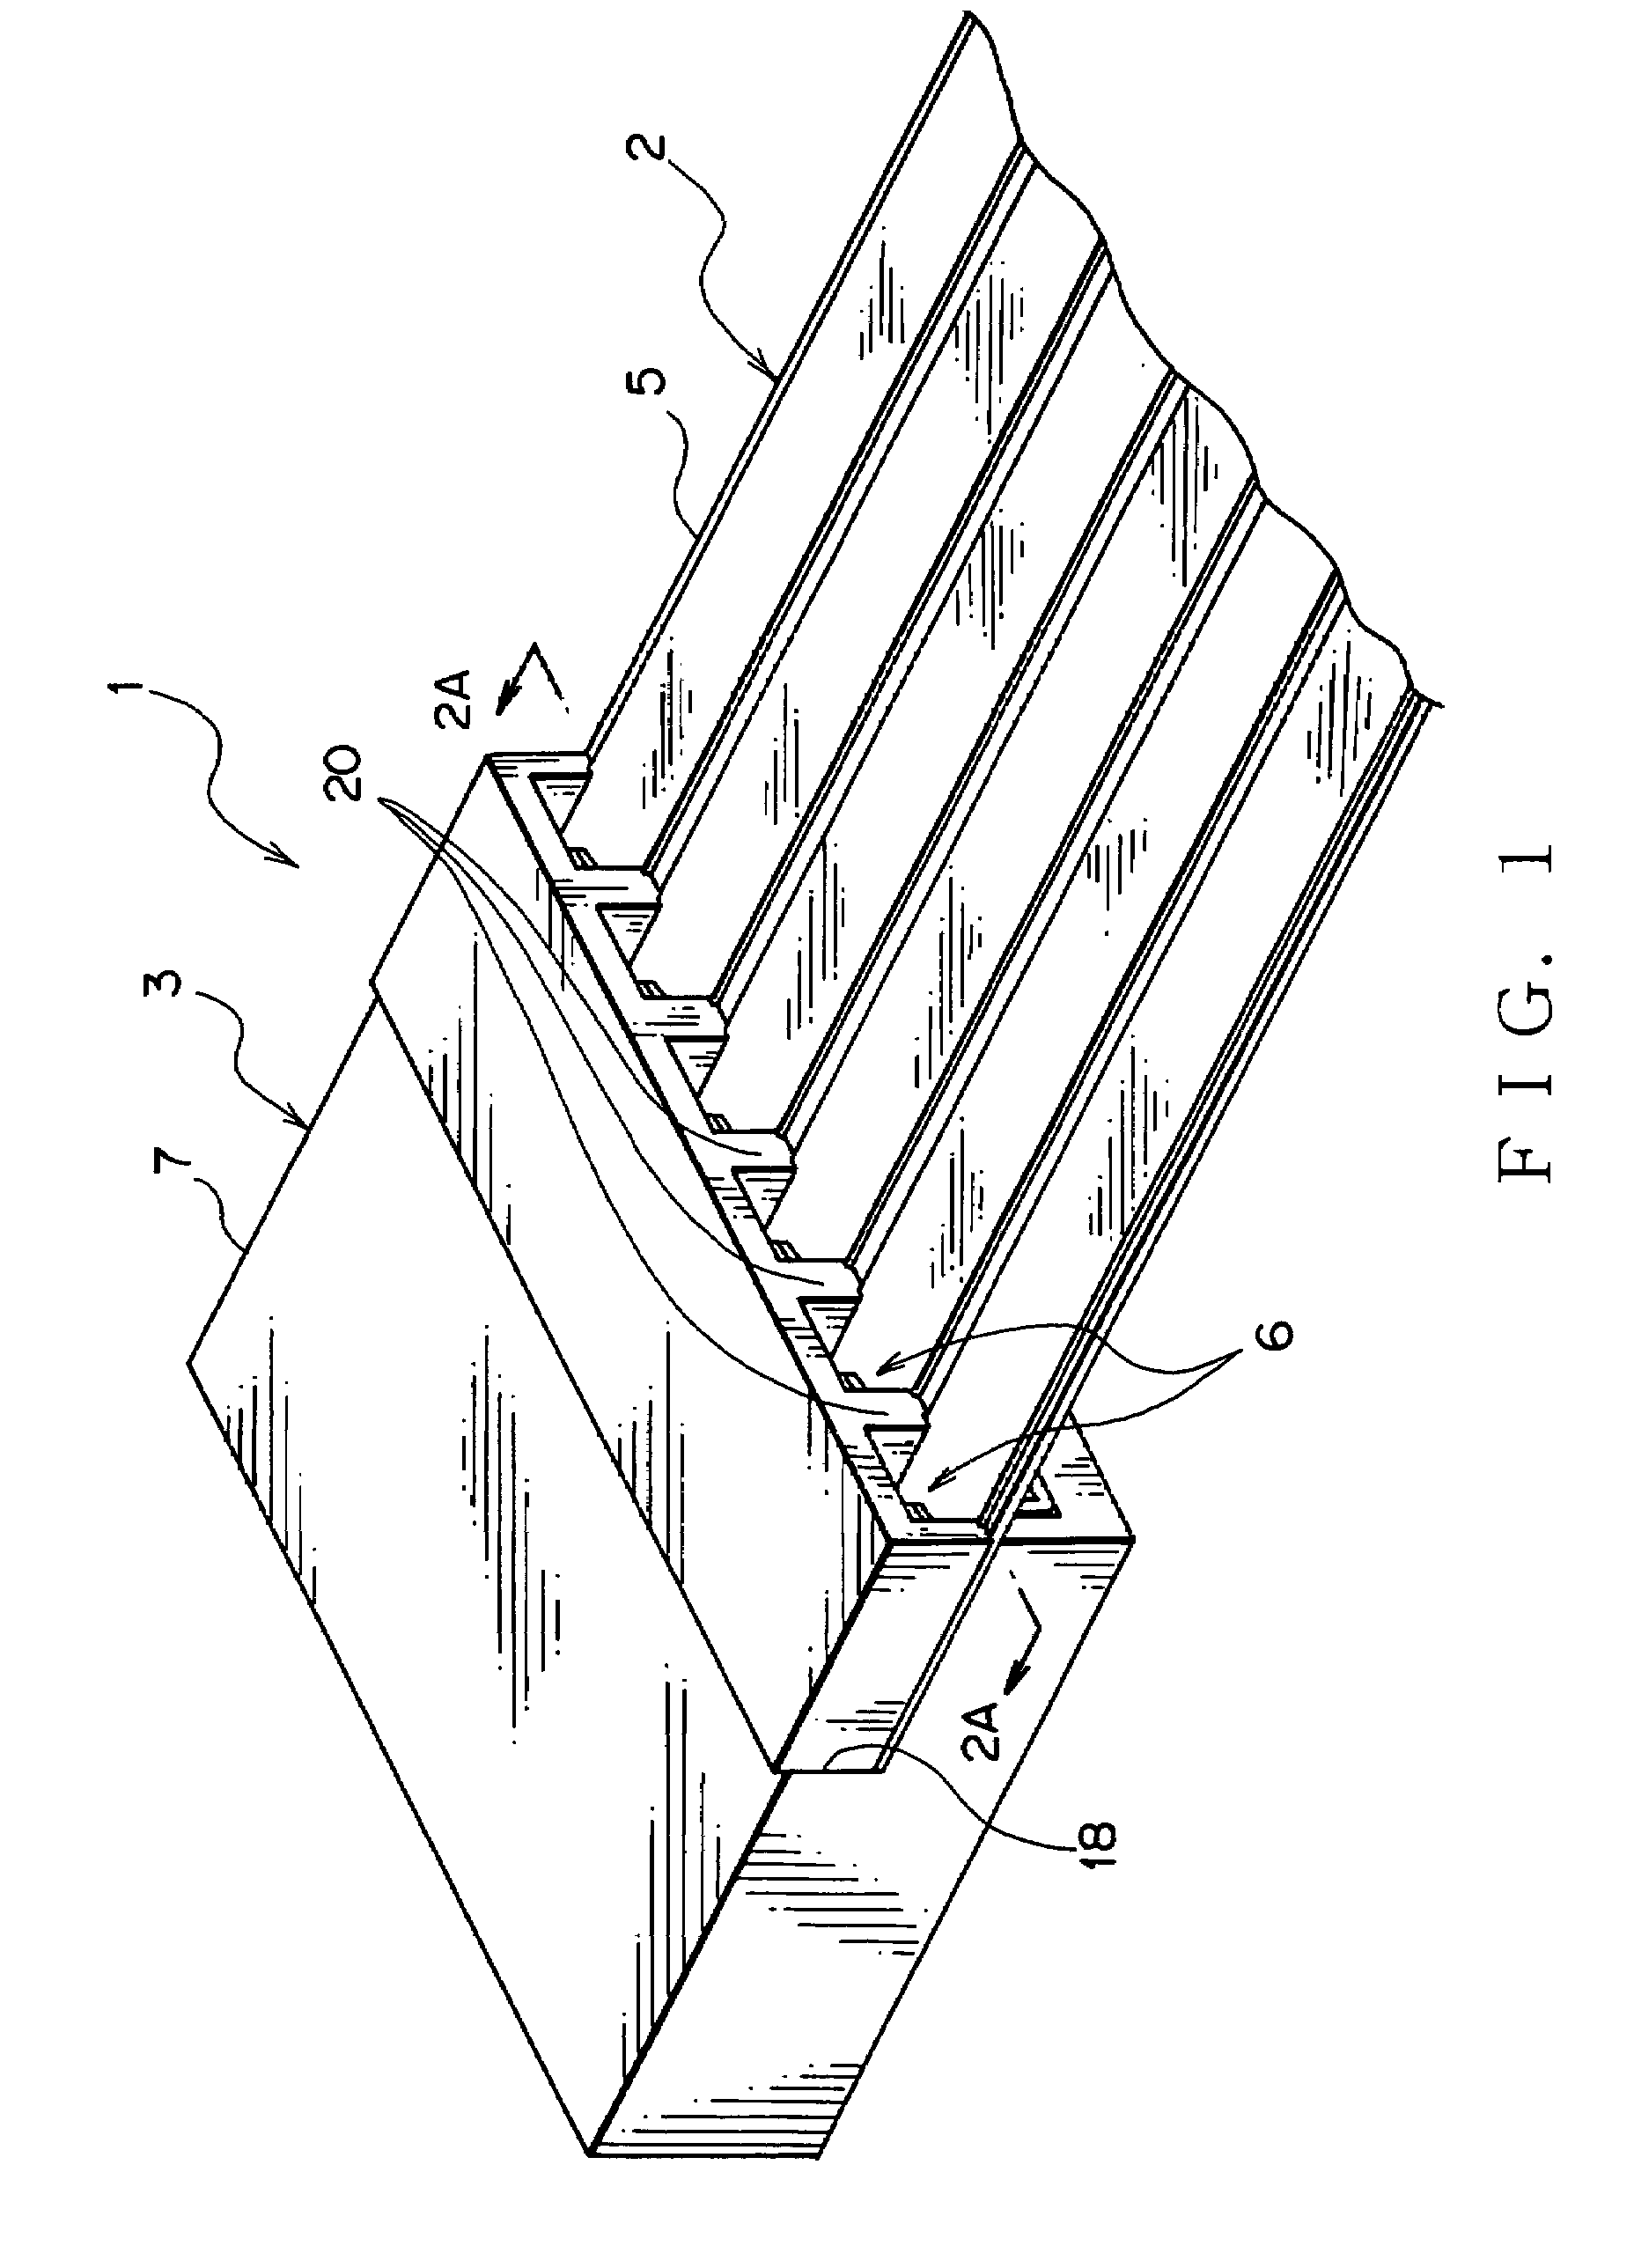 Wiring harness, connector, and method of assembling the wiring harness